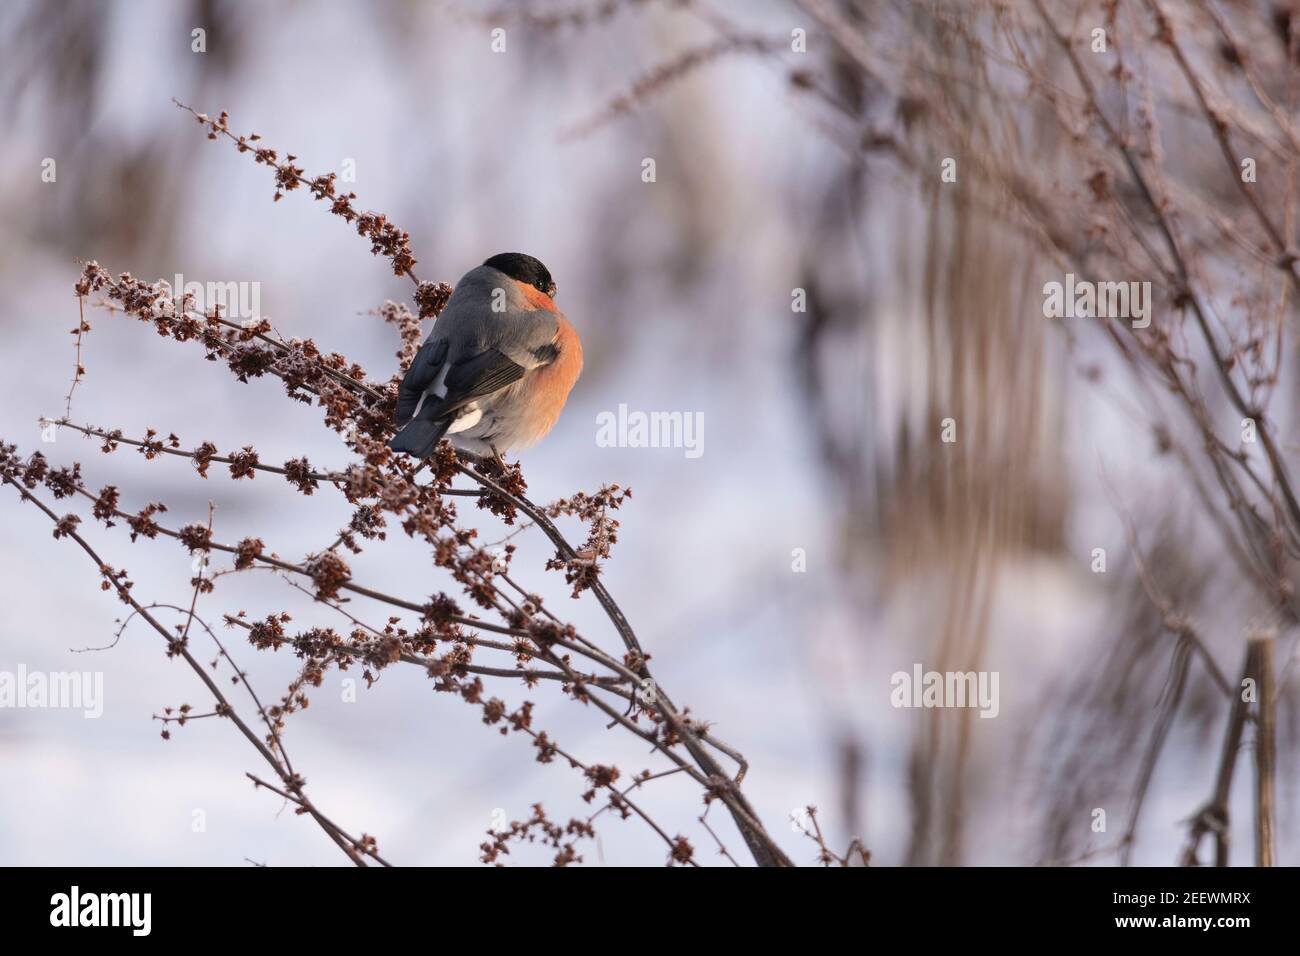 A Male Bullfinch (Pyrrhula Pyrrhula) Perched on a Broad-Leaved Dock Stem (Rumex Obtusifolius) in a Snow-Covered Landscape Stock Photo